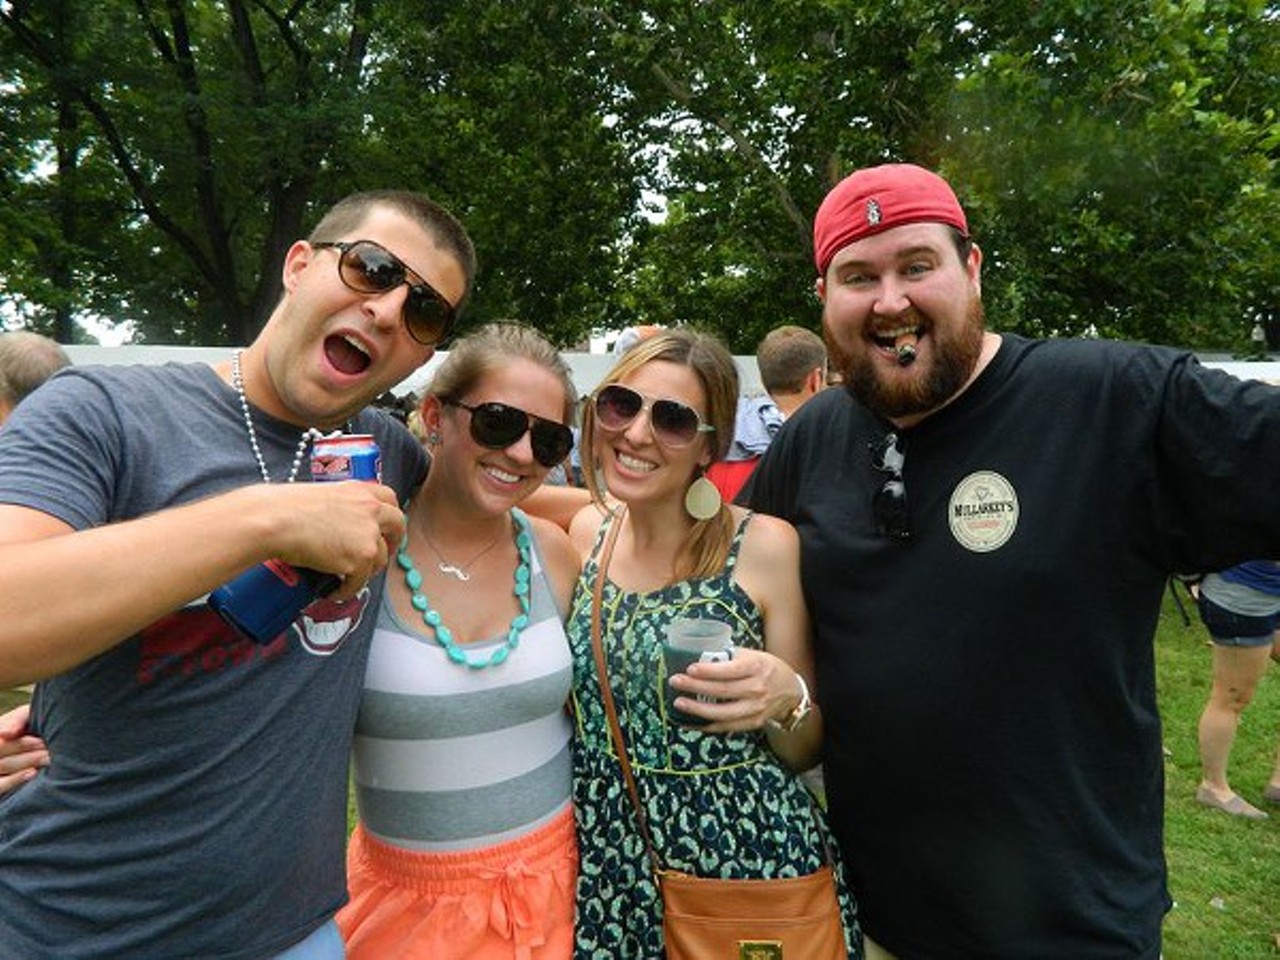 15 Awesome Photos of Scene Ale fest 2013